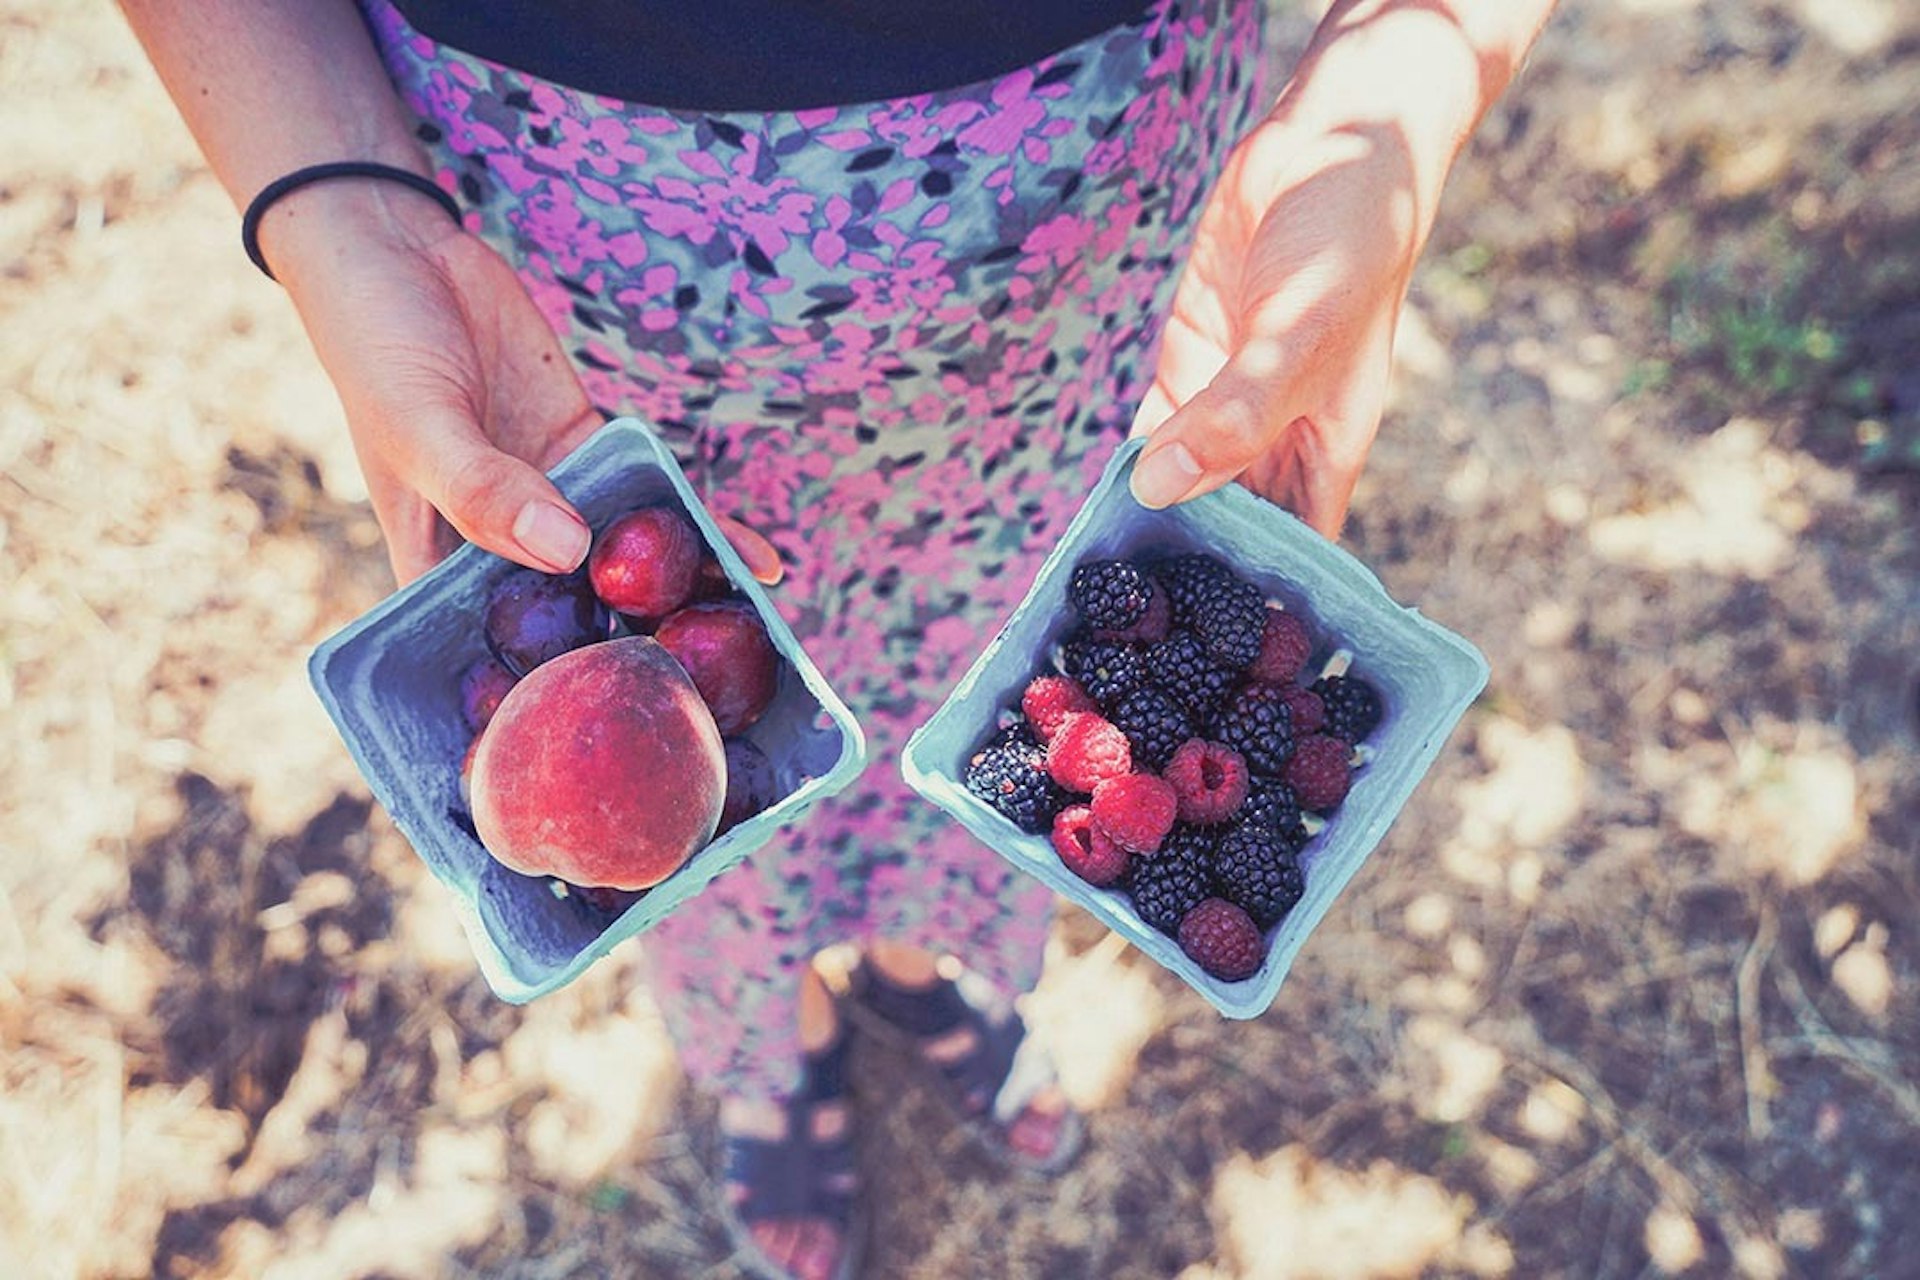 A woman in a flowery dress holding a punnet of summer fruit in each of her hands —one has a mixture of berries, the other has a mixture of plums and nectarines.